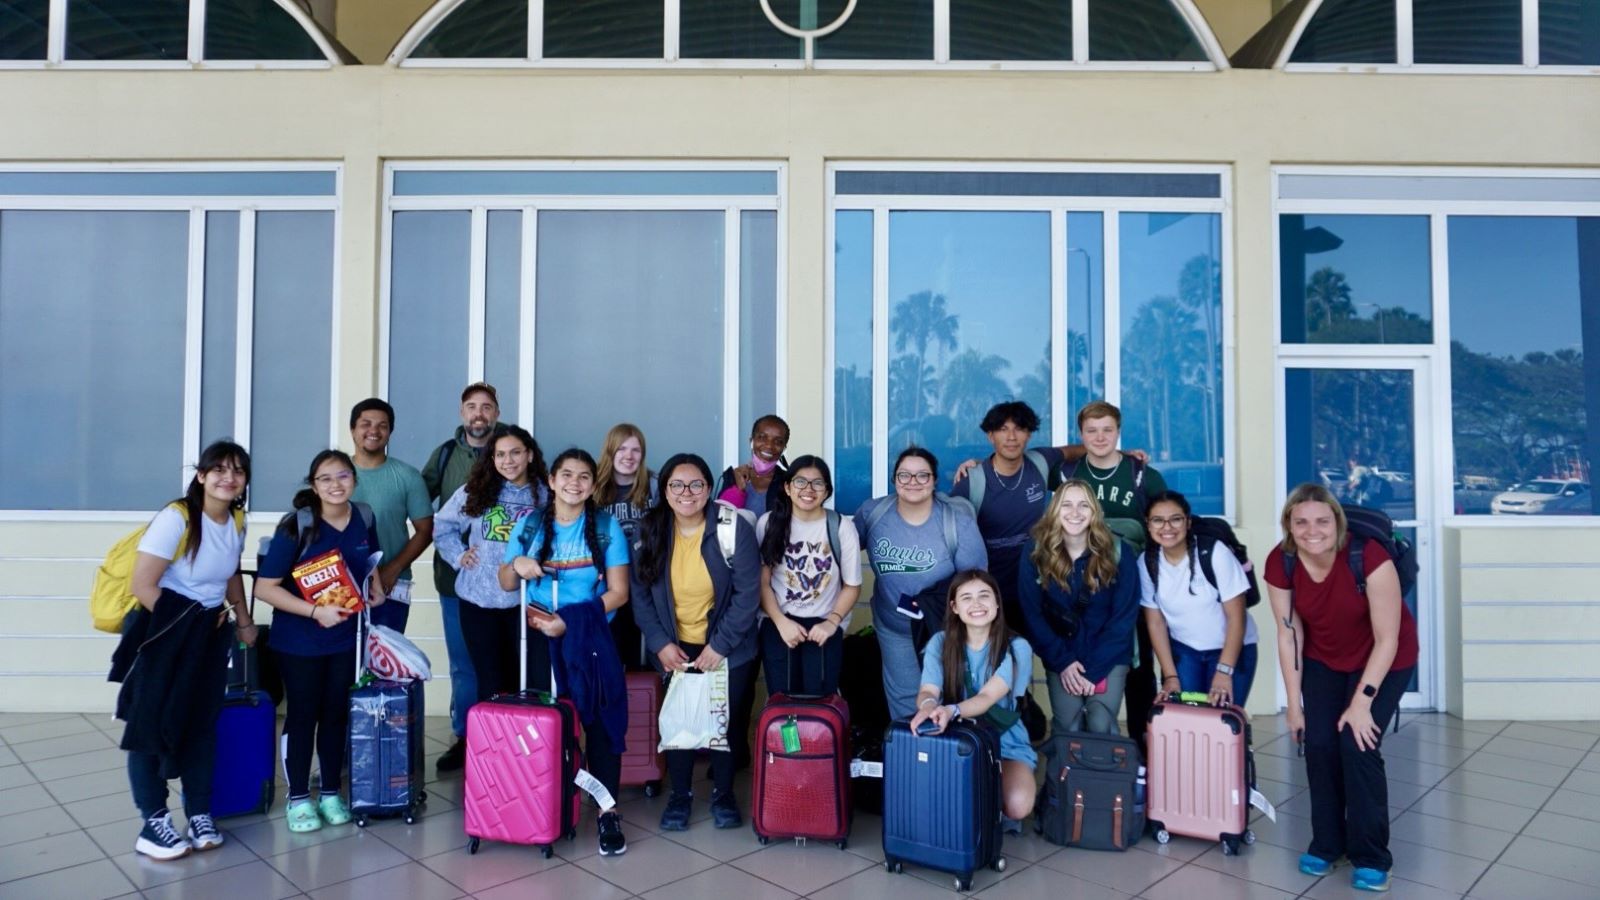 Group of students with luggage outside of an airport